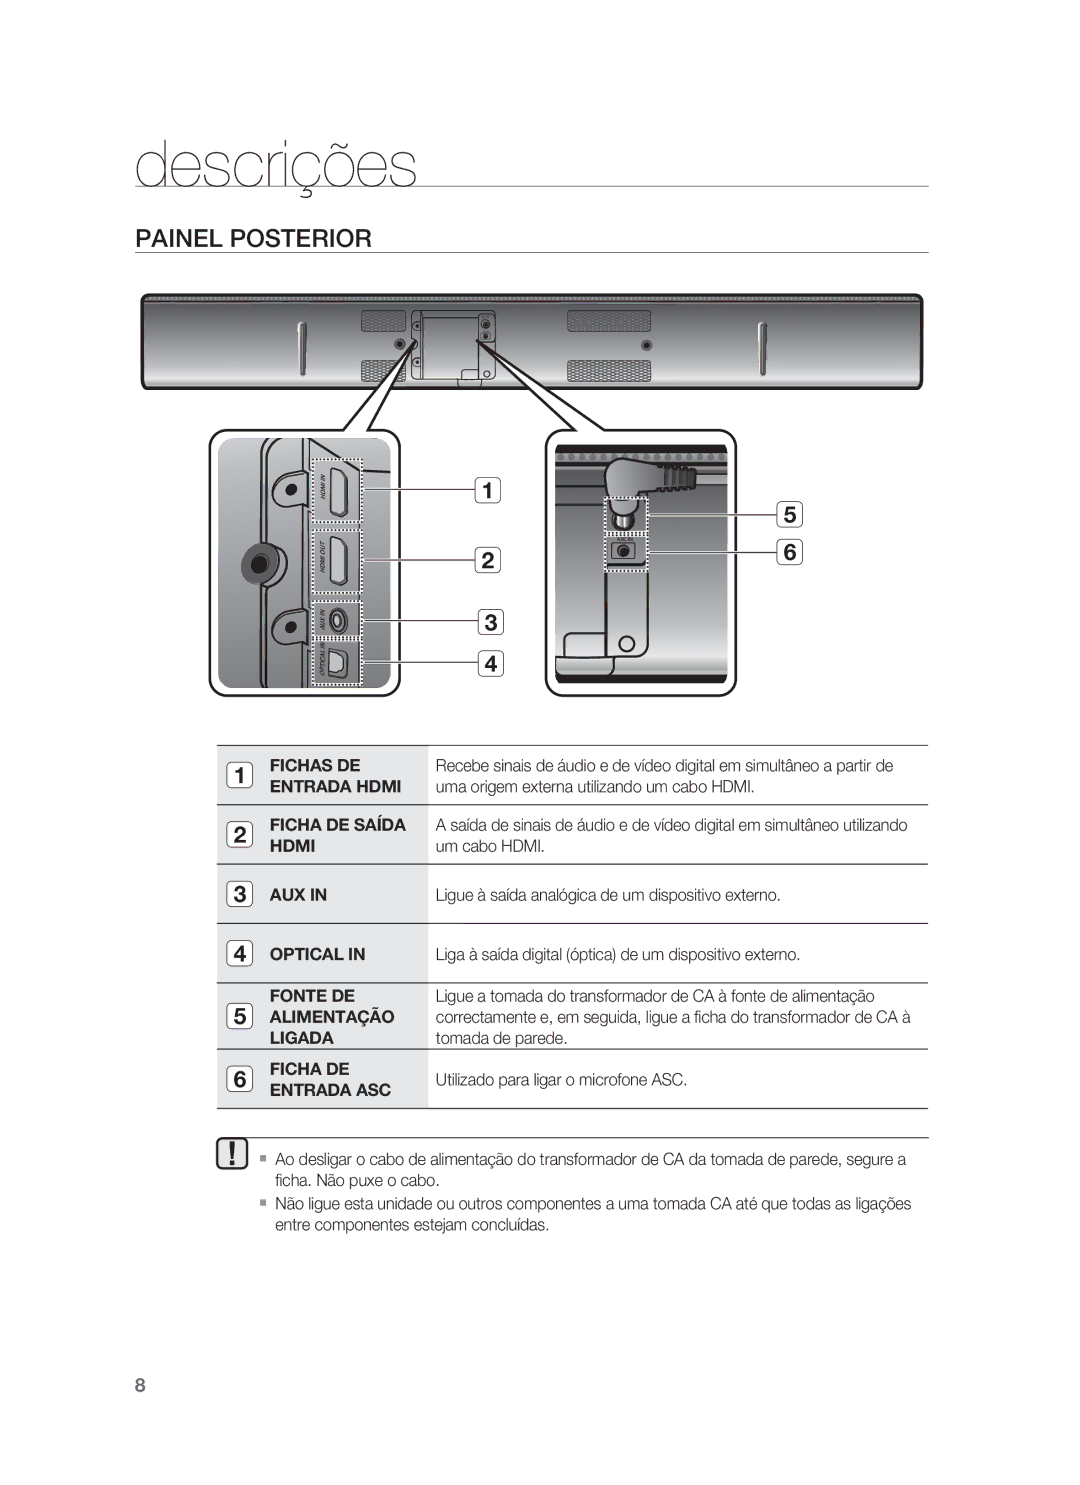 Samsung HW-F850/ZF manual Painel Posterior 